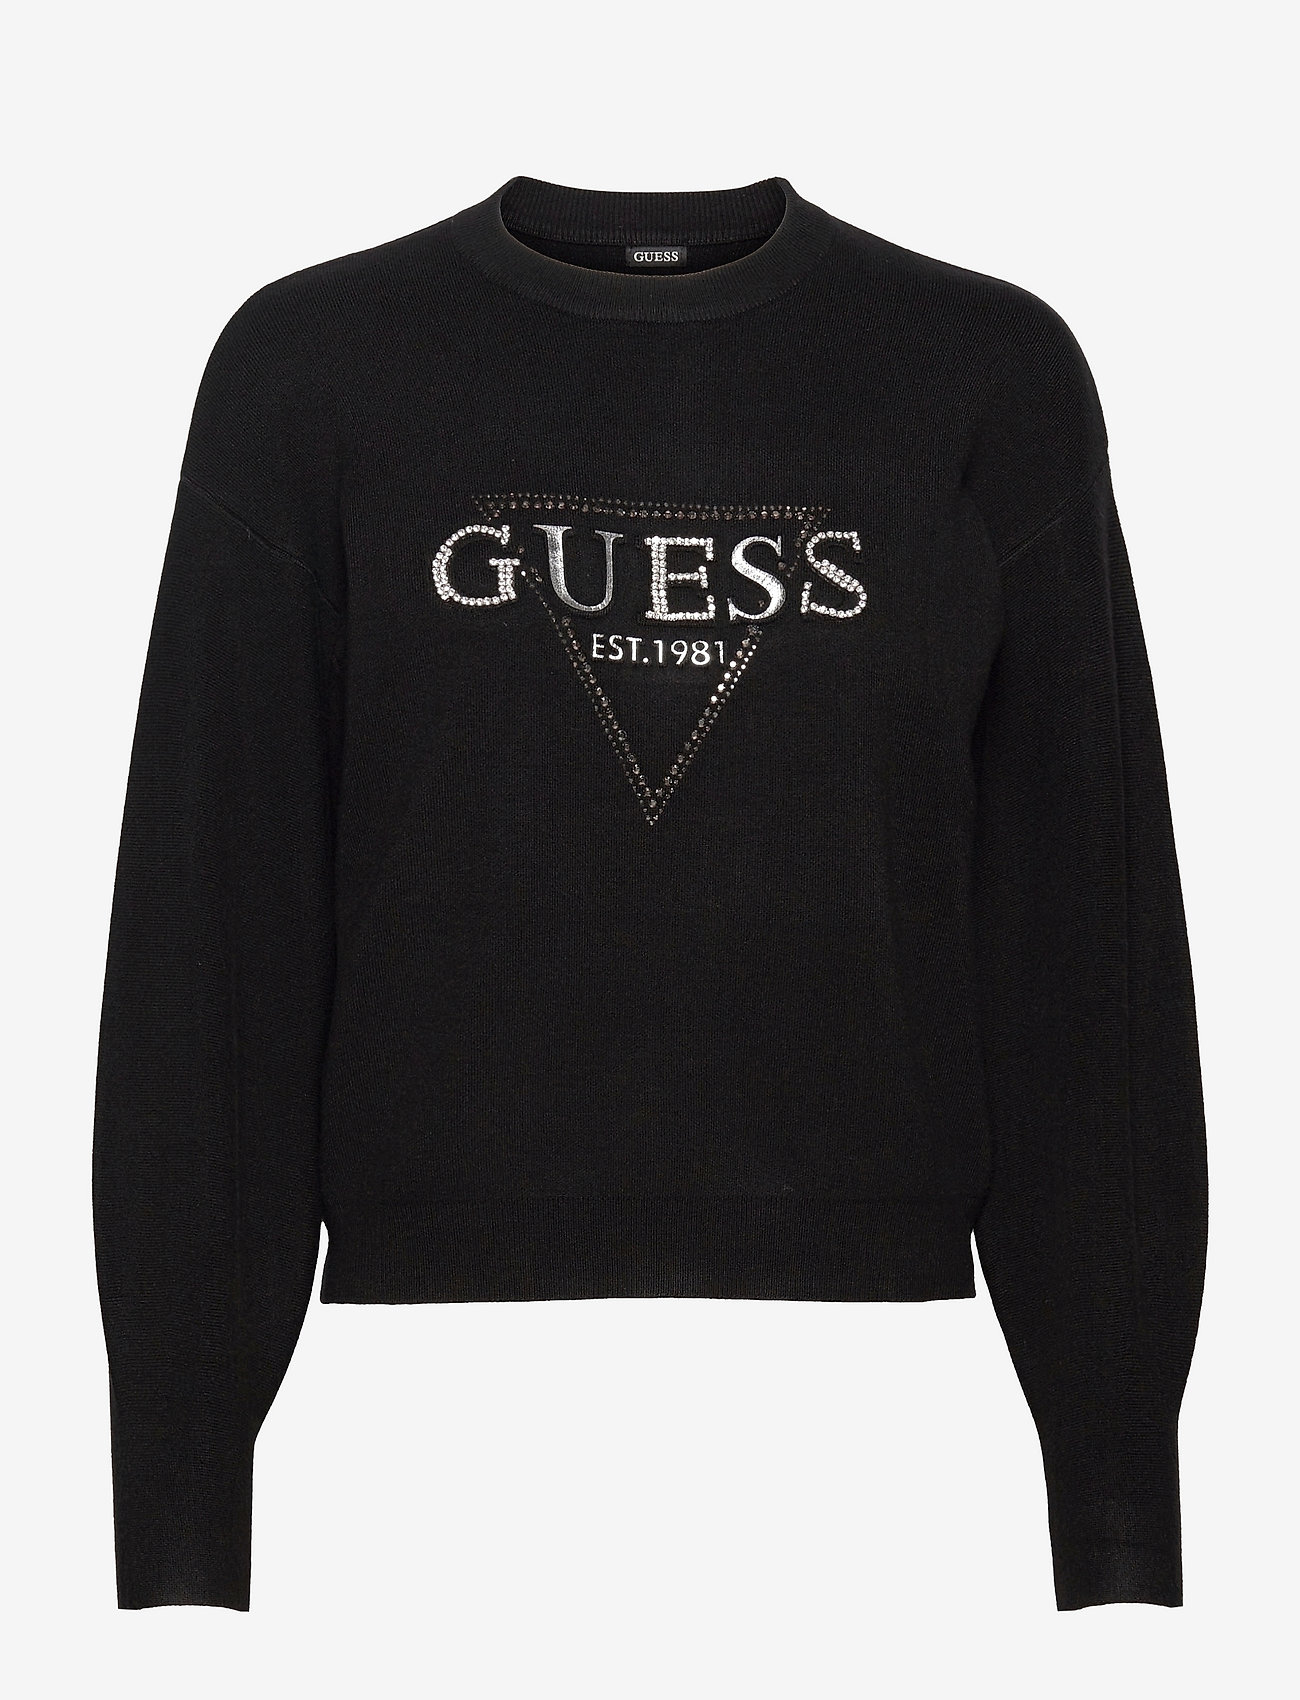 GUESS Jeans Beatrice Rn Ls Swtr - Jumpers | Boozt.com